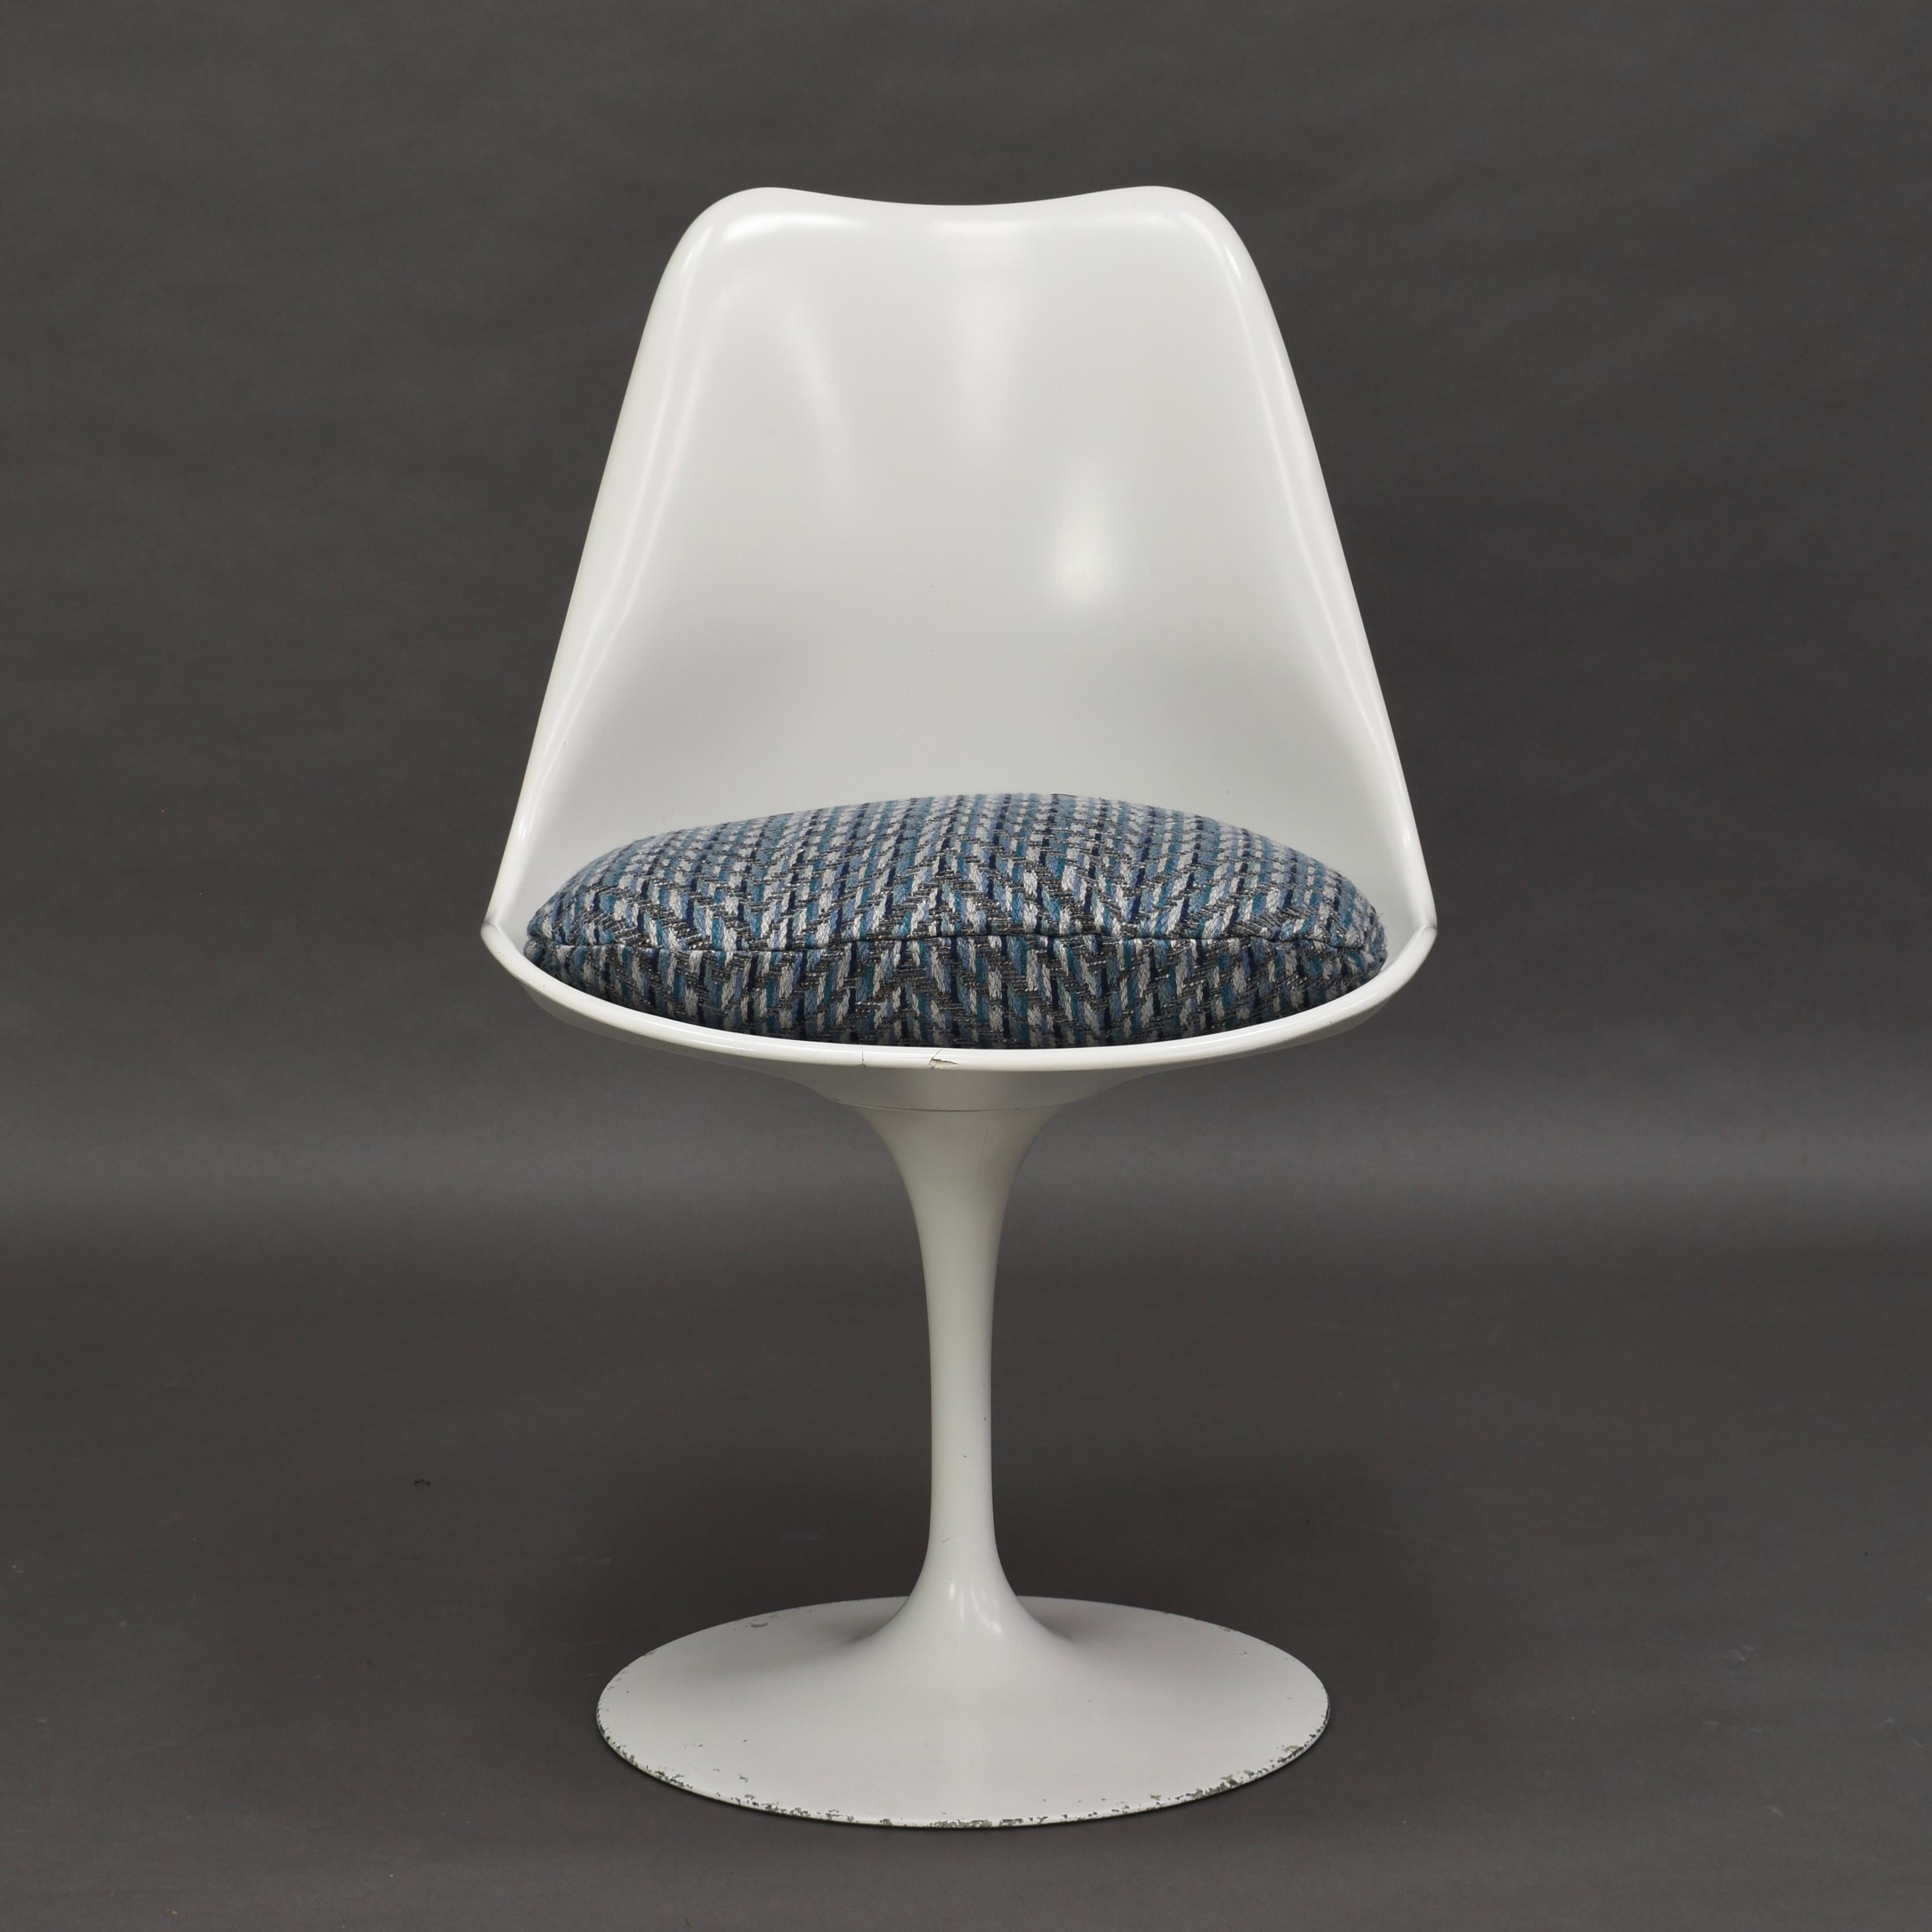 Tulip chair by Eero Saarinen. The cushions have new fabric.

Designer: Eero Saarinen

Country: Finland / USA

Model: 150 Tulip chairs

Material: Fiberglass / aluminum

Design period: 1950s

Date of manufacturing: 1950s-1960s

Size: W x